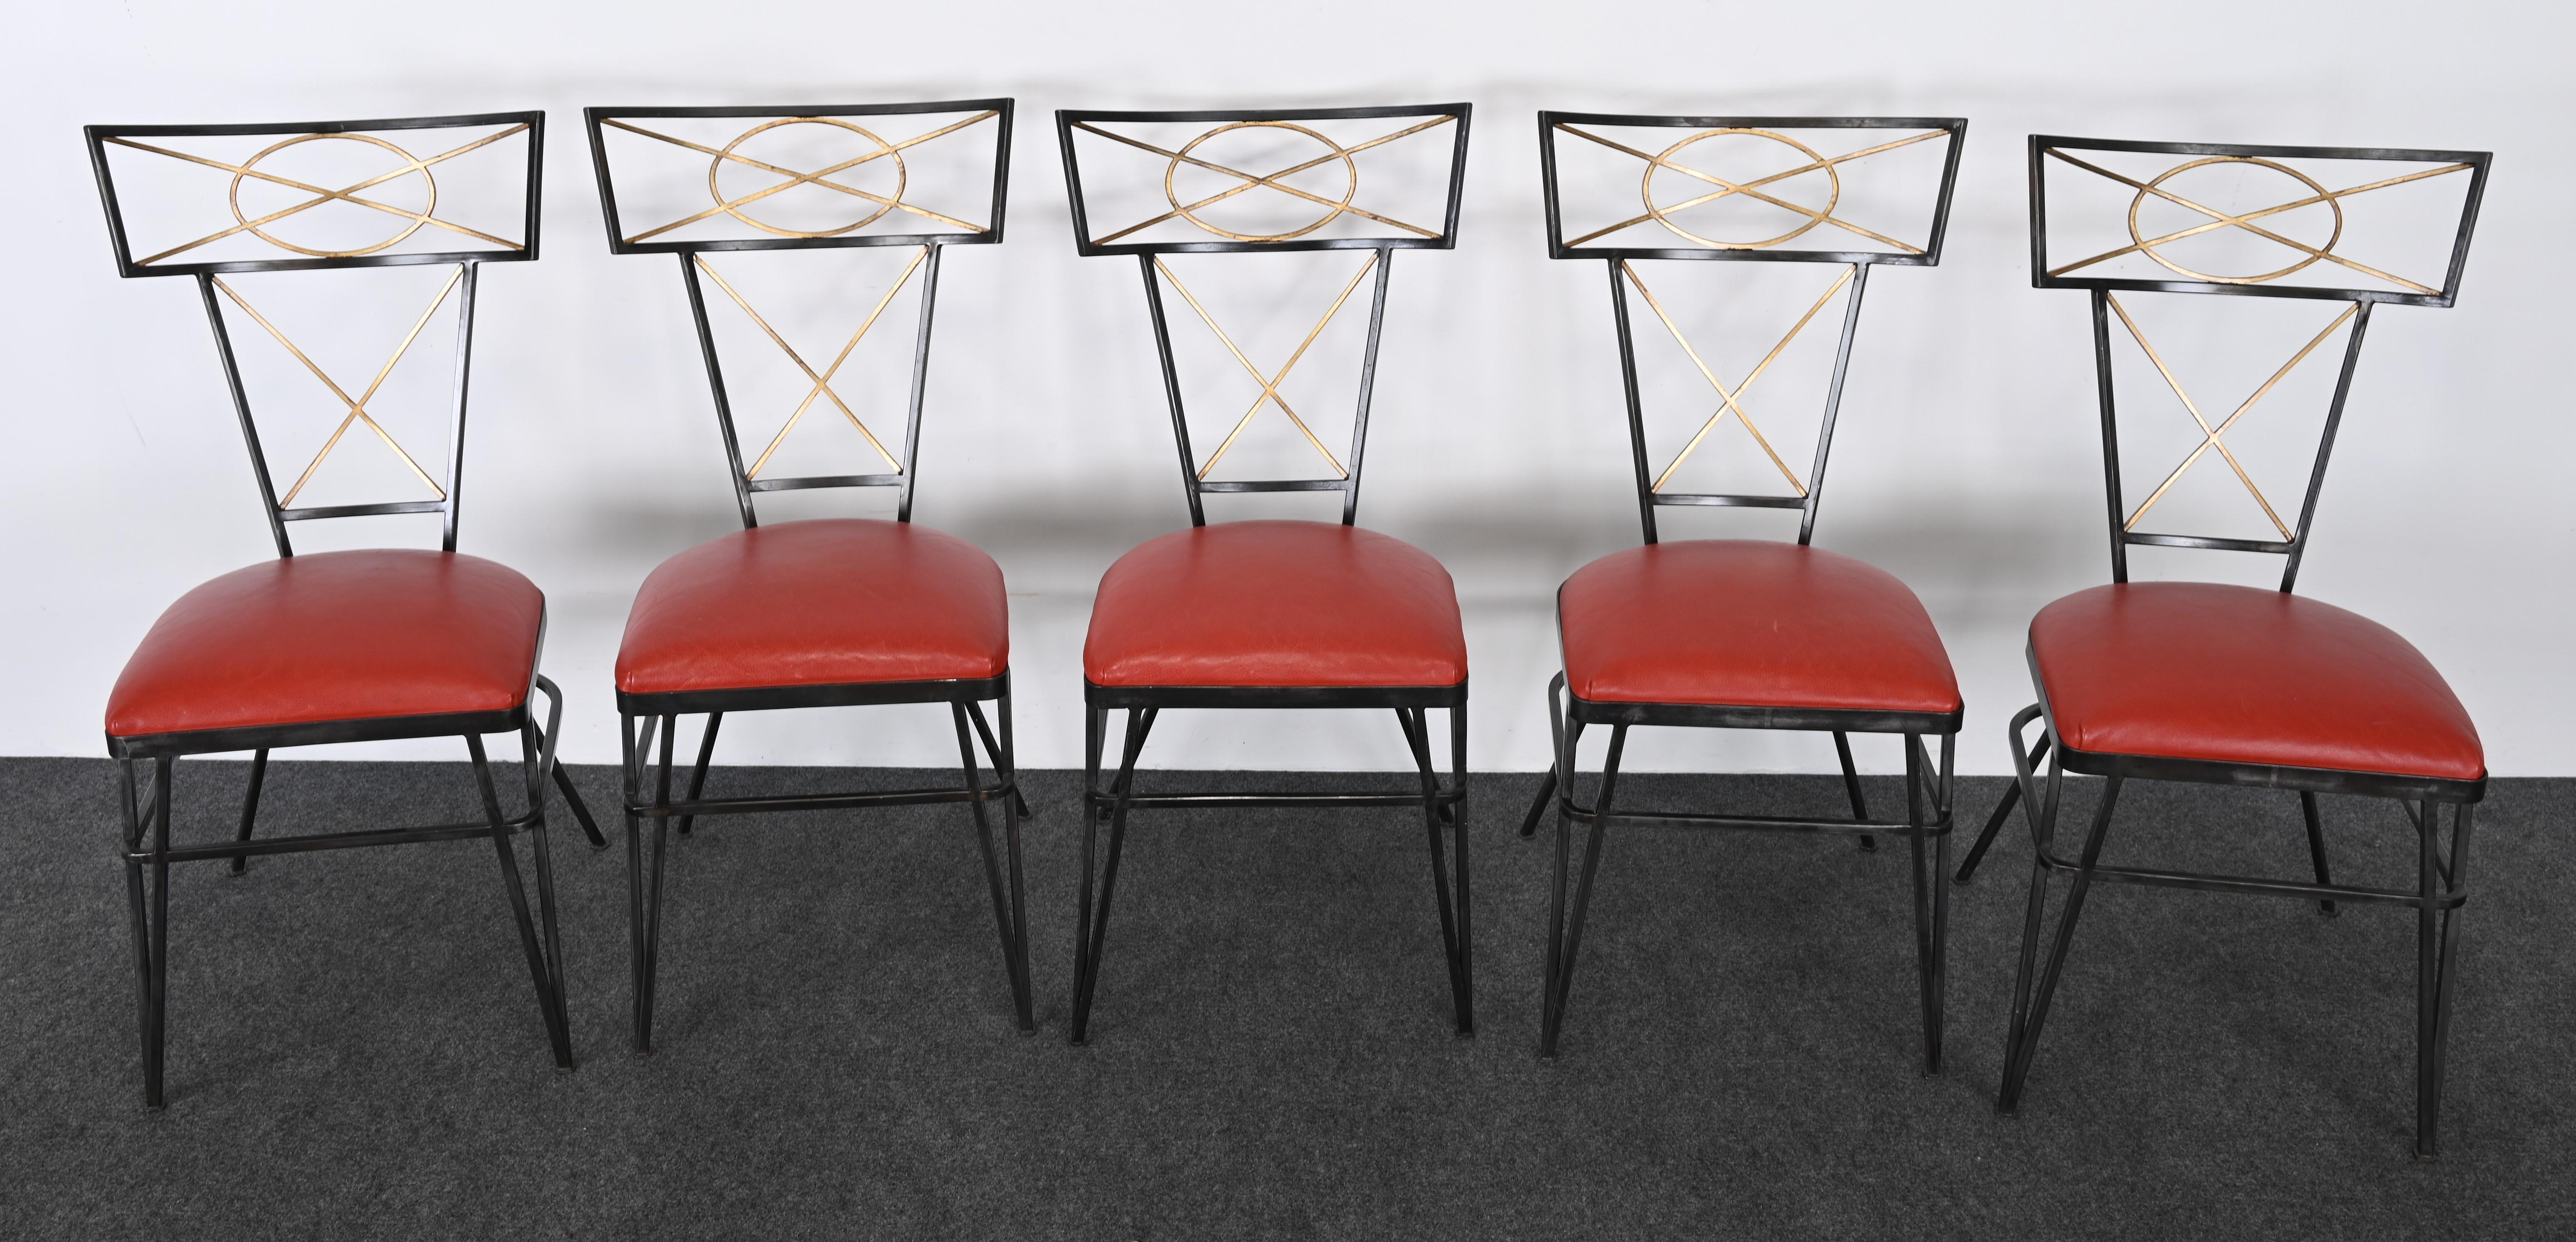 Set of Ten Steel and Gold Gilt Neoclassical Chairs, 20th Century For Sale 4